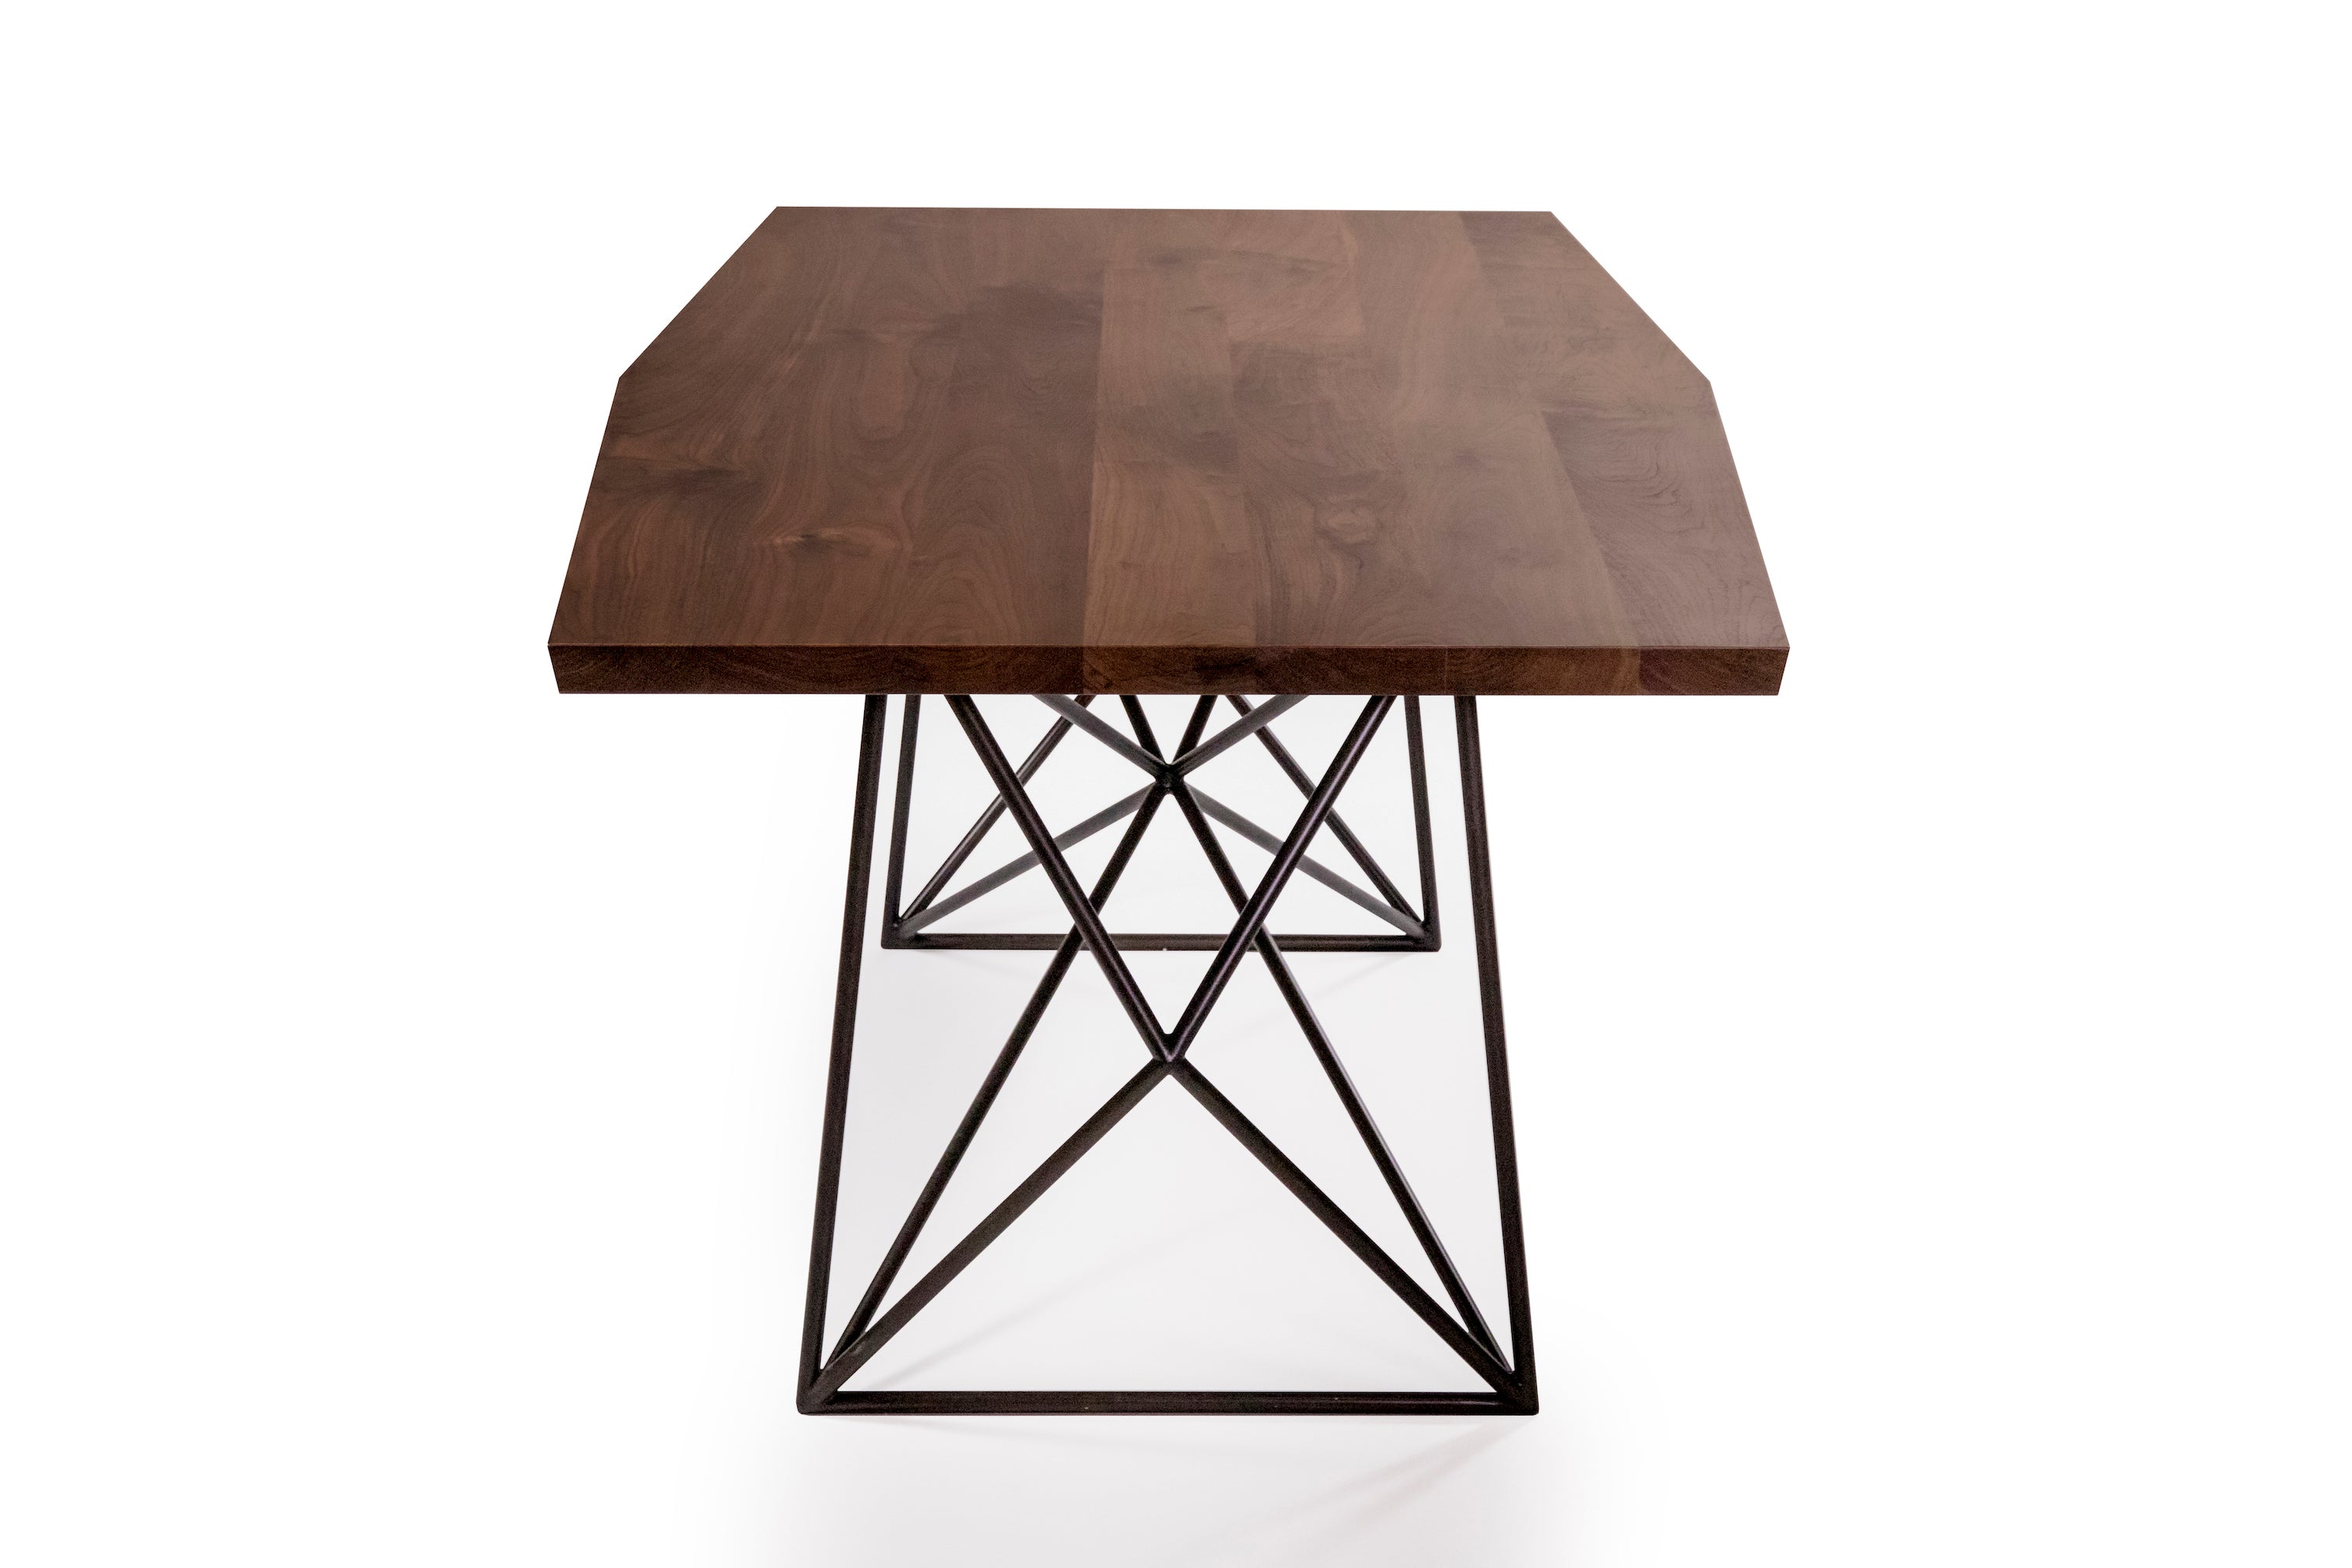 Fuller midcentury modern walnut wood Dining Table handcrafted by Hunt & Noyer in Michigan